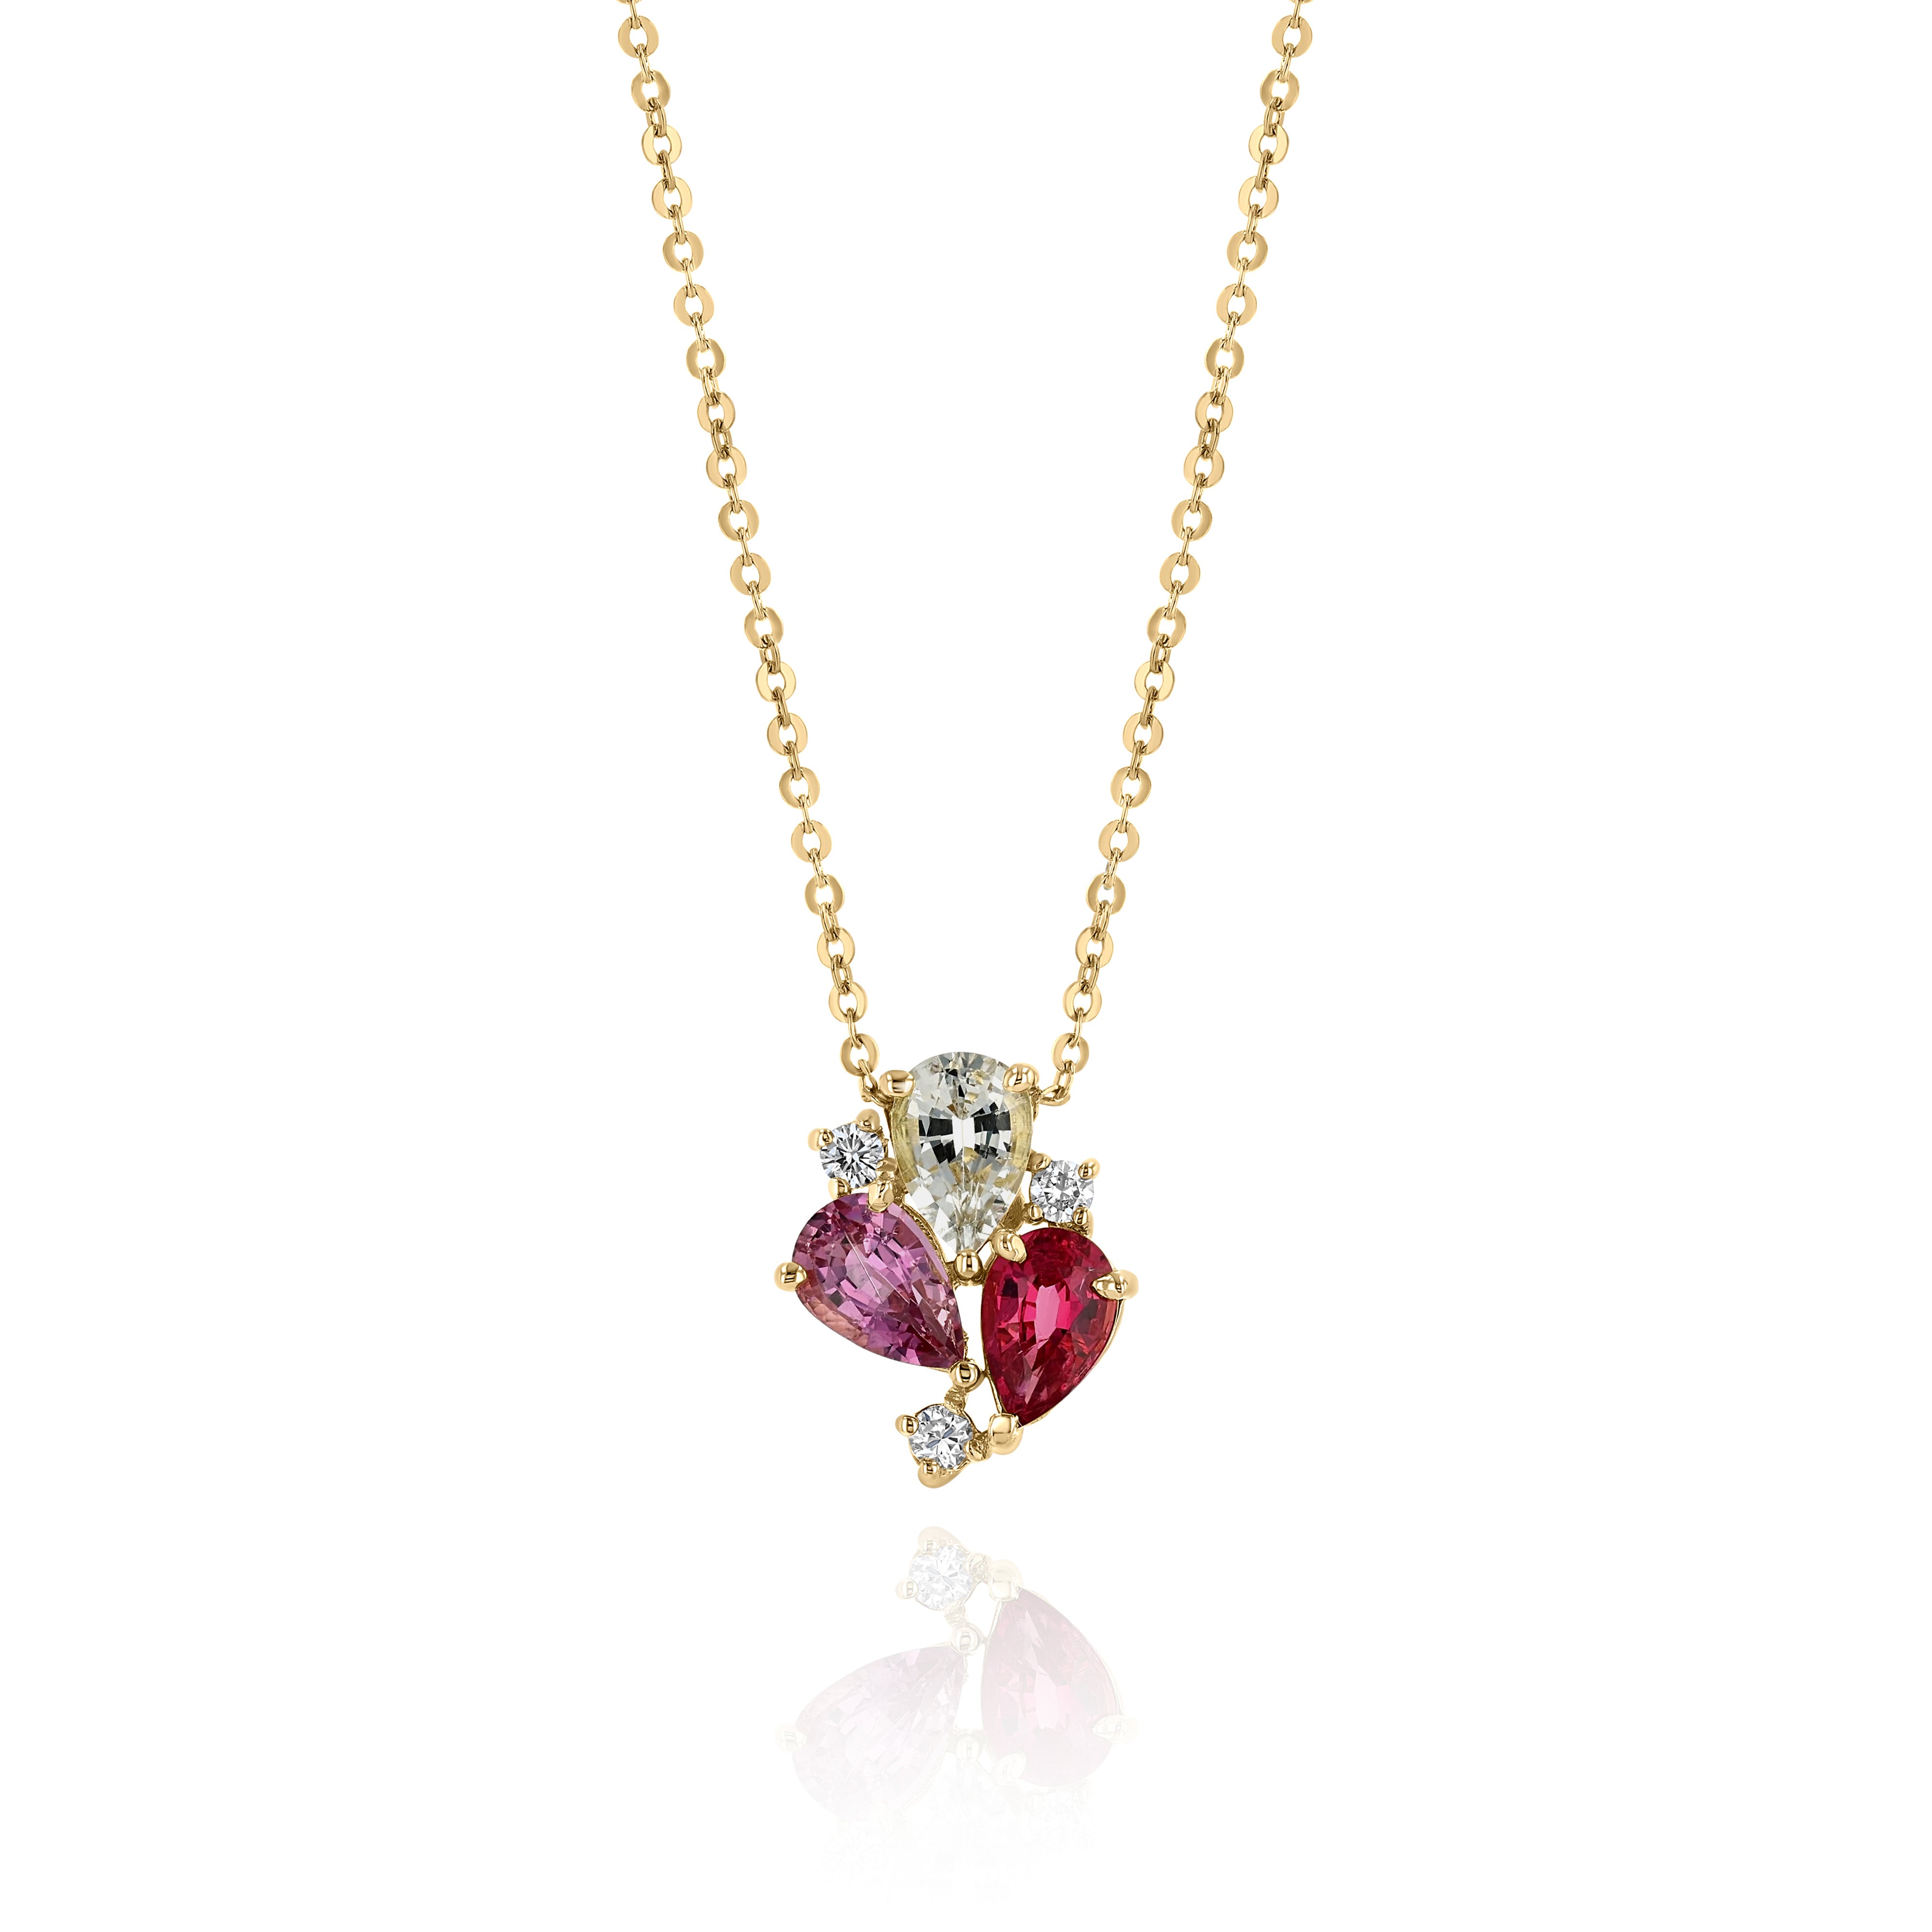 Yellow Gold Necklace with White Sapphire, Pink Tourmaline, Rubellite, and Diamonds, Small